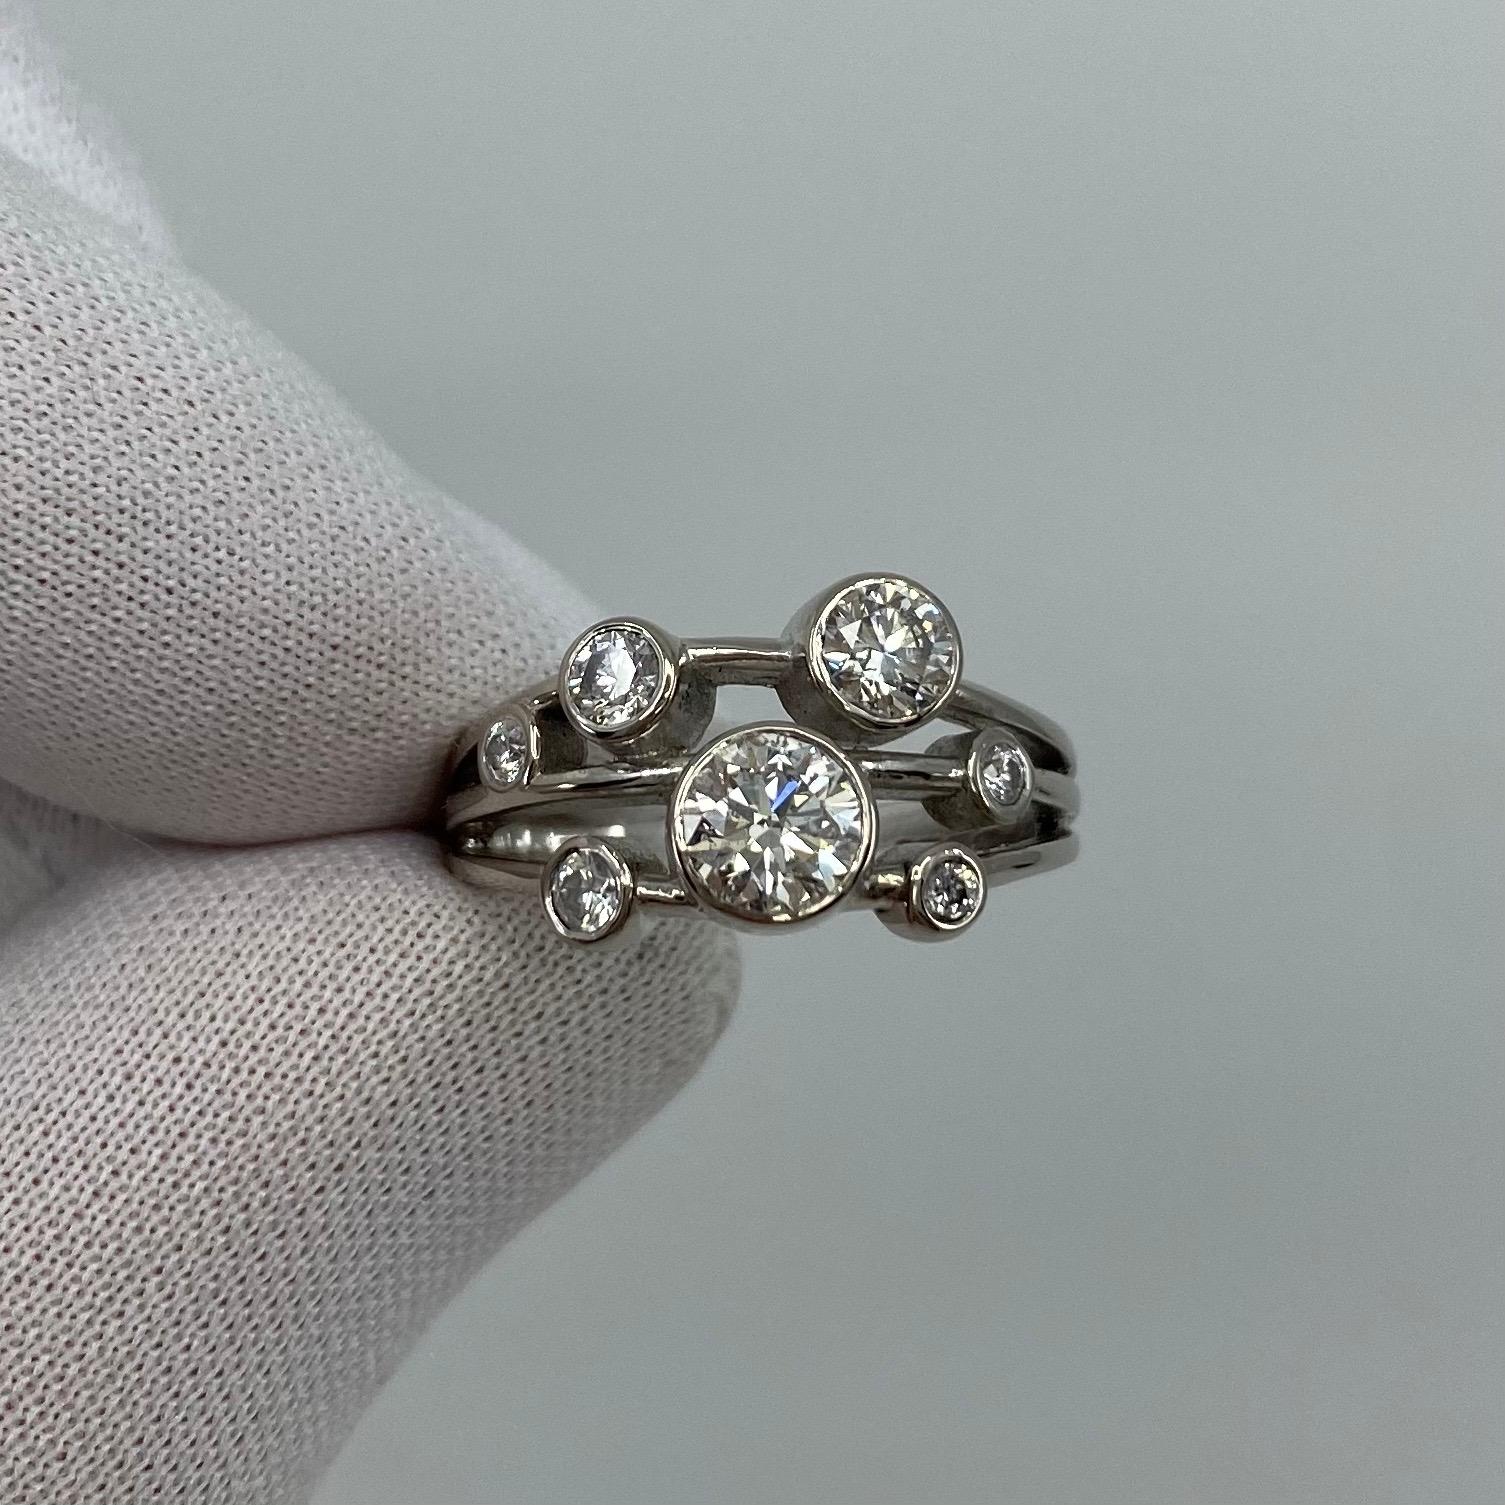 1.00 Carat Diamond Raindance-Style 18k White Gold Ring.

A beautiful 18 Karat white gold ring set with 7 round brilliant cut white diamonds. 
The largest diamond is a GIA Certified 0.70ct with Si2 clarity and H colour, also has a very good round